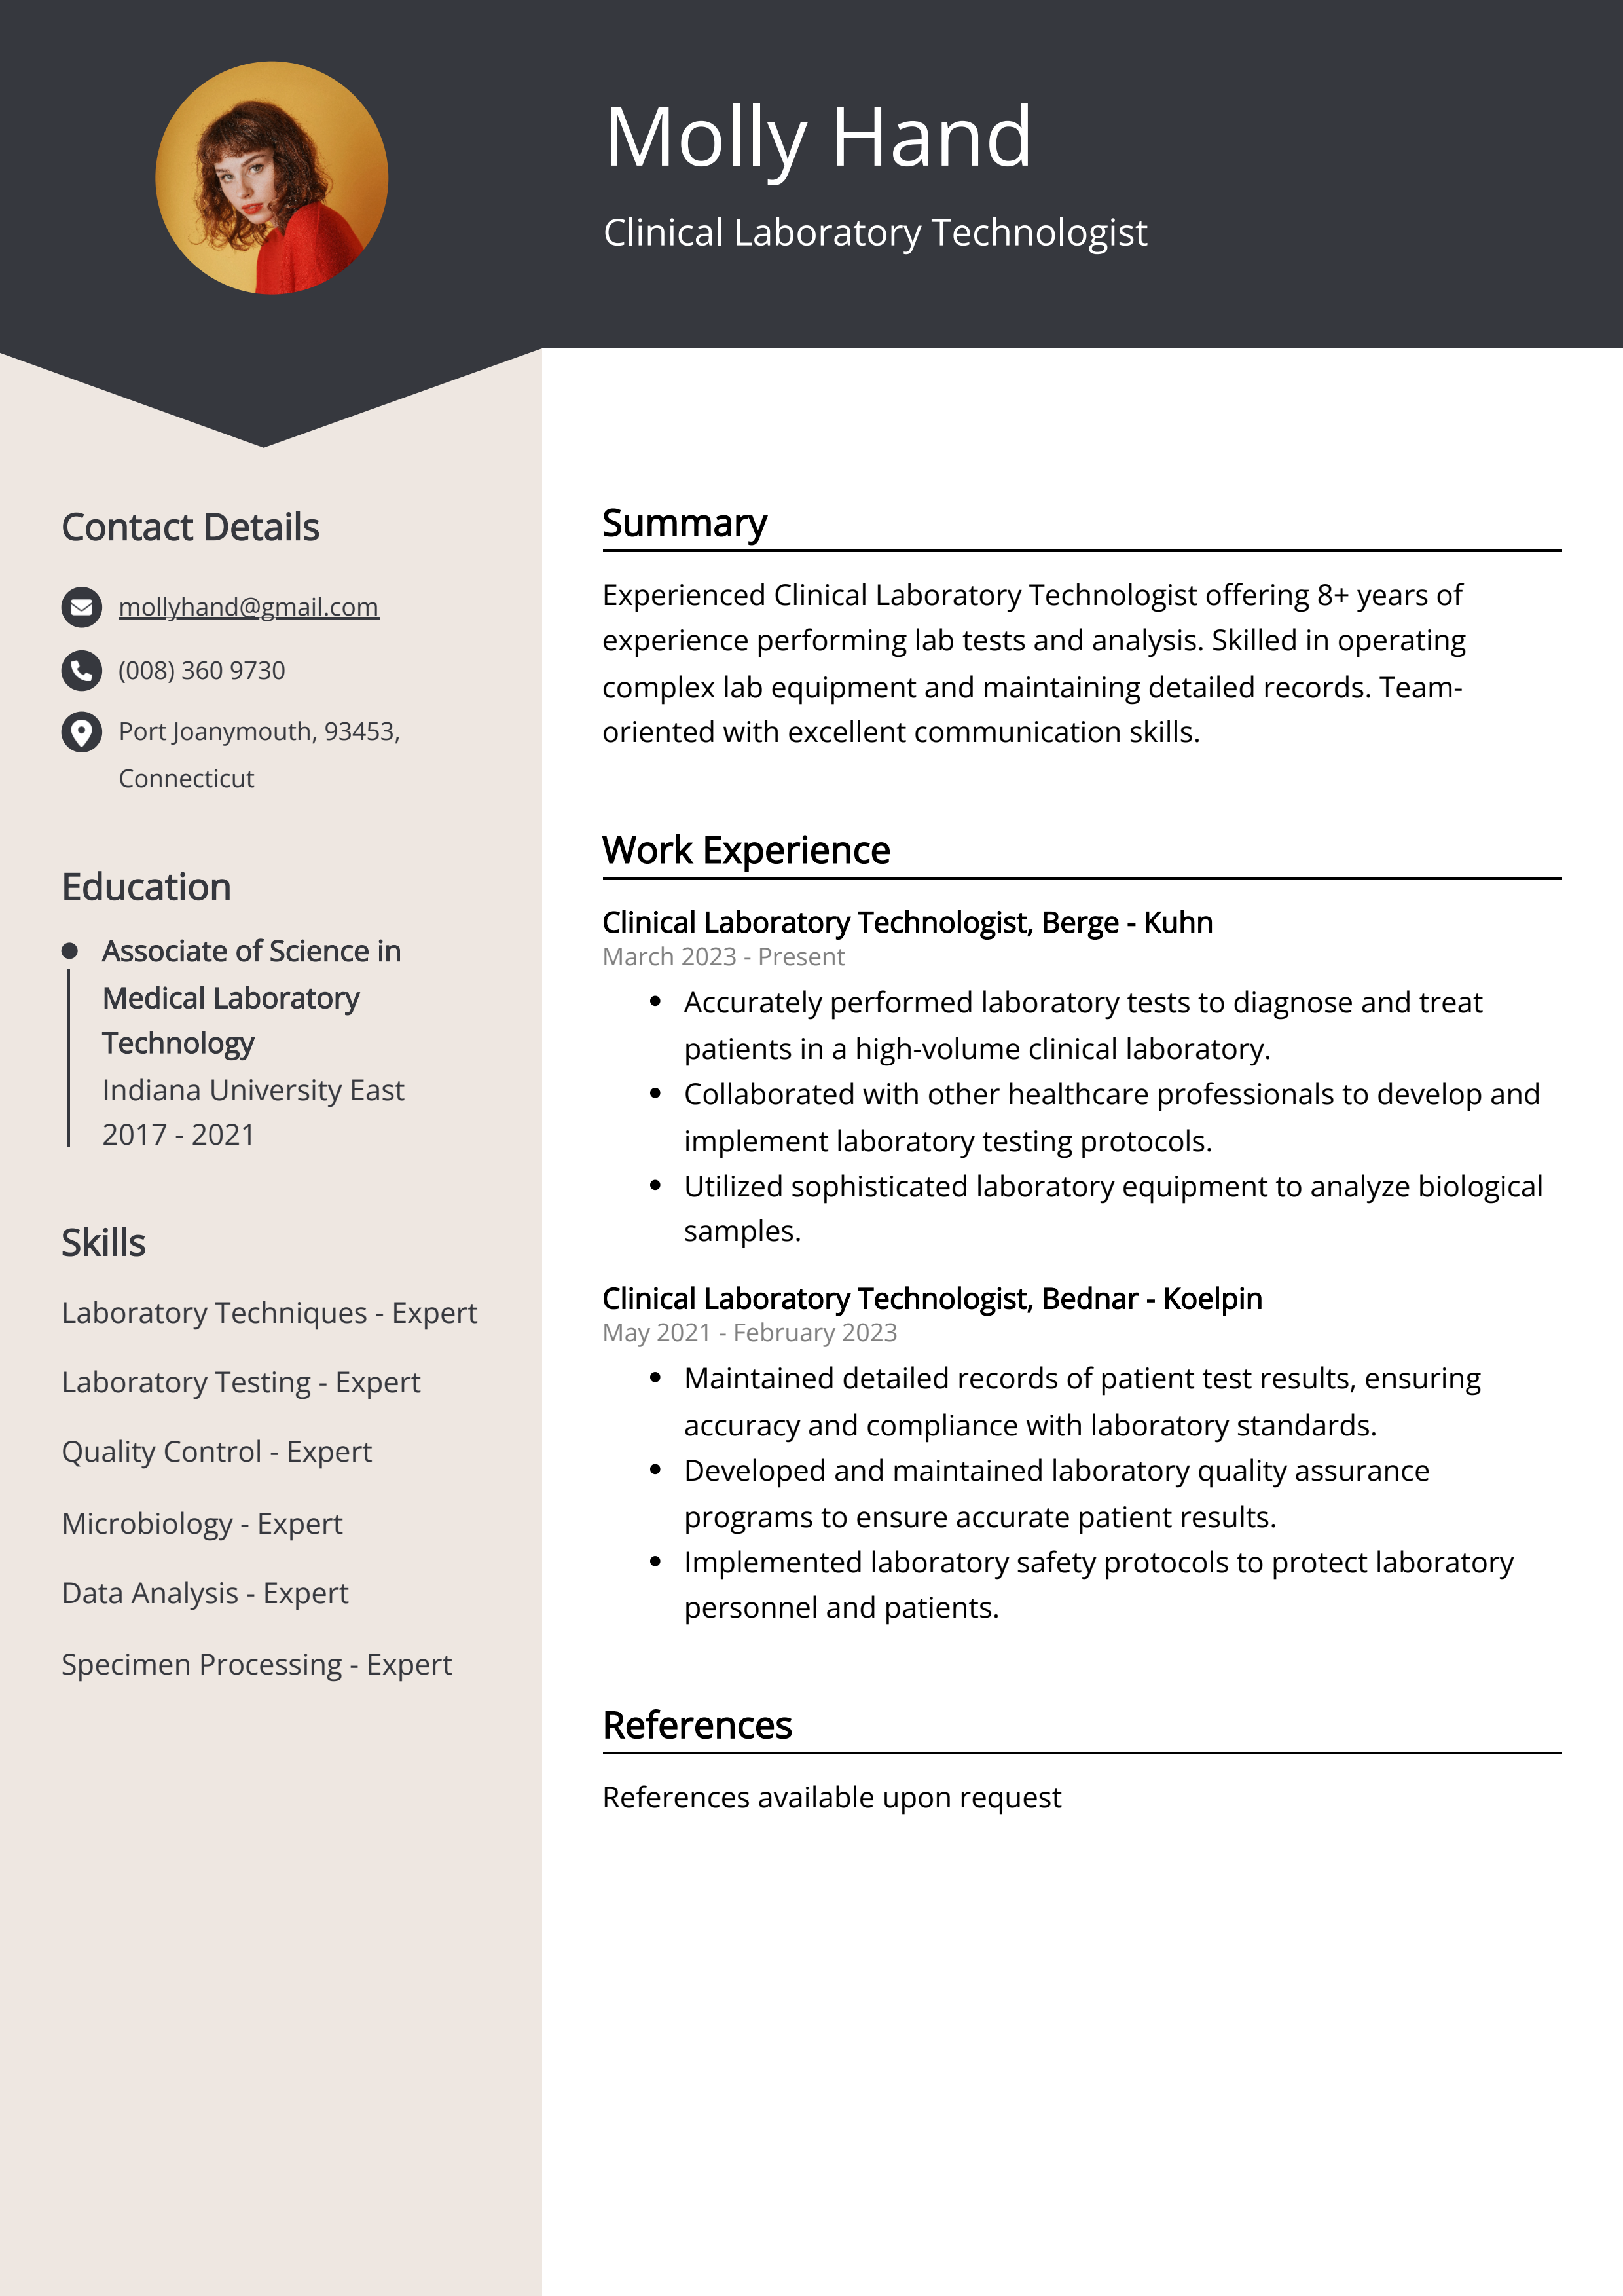 Clinical Laboratory Technologist CV Example